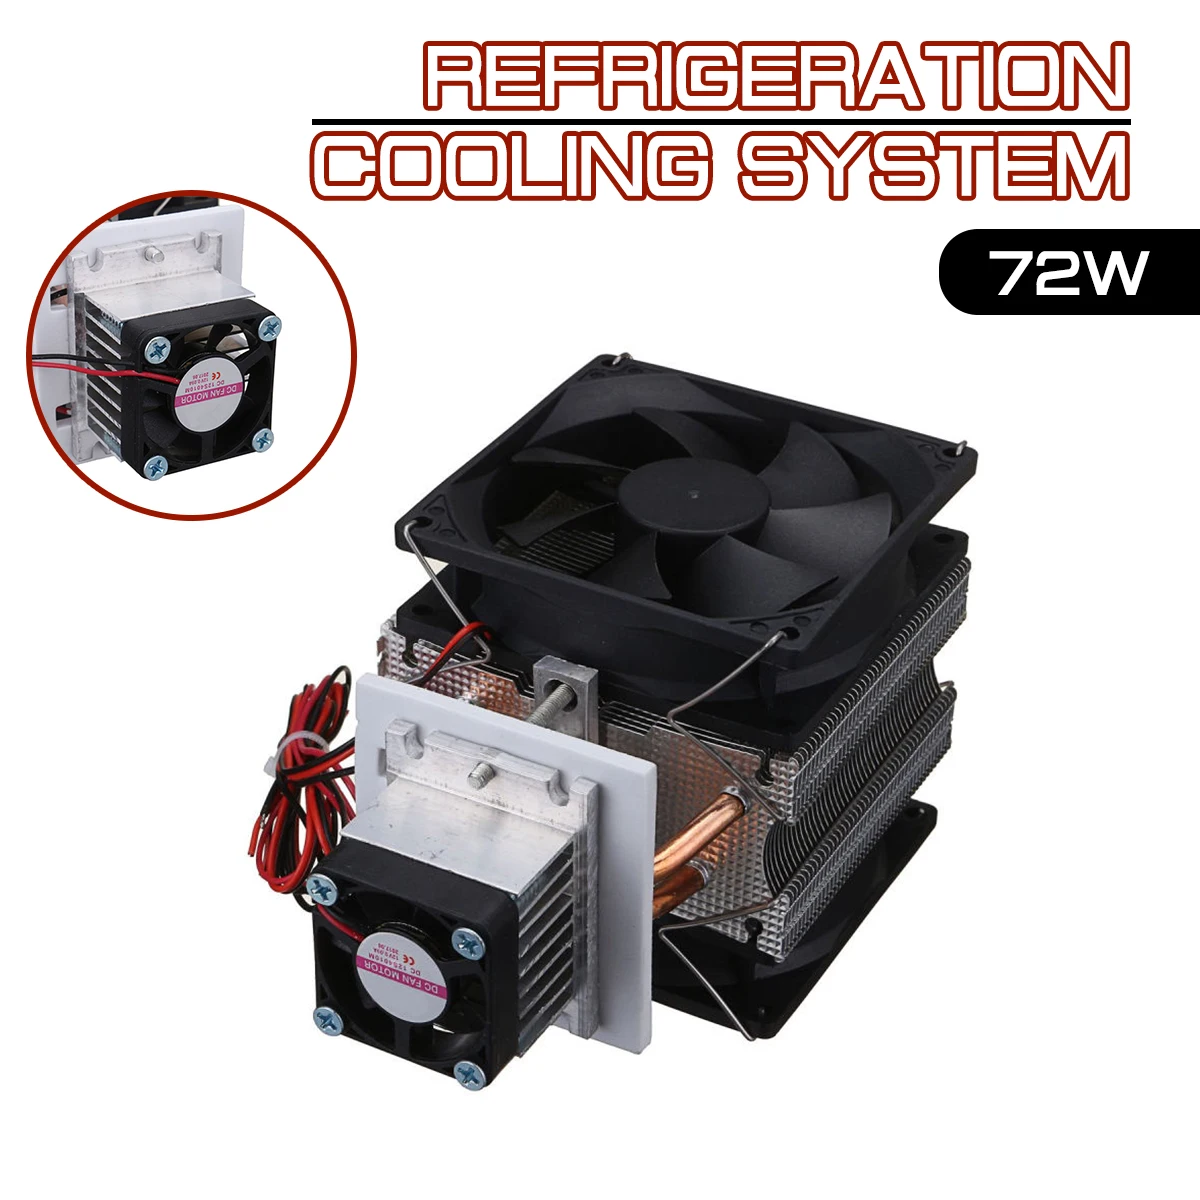 

Household semiconductor refrigeration sheet system radiator 72W Cooler Refrigeration Semiconductor Cooling System Kit Cooler Fan